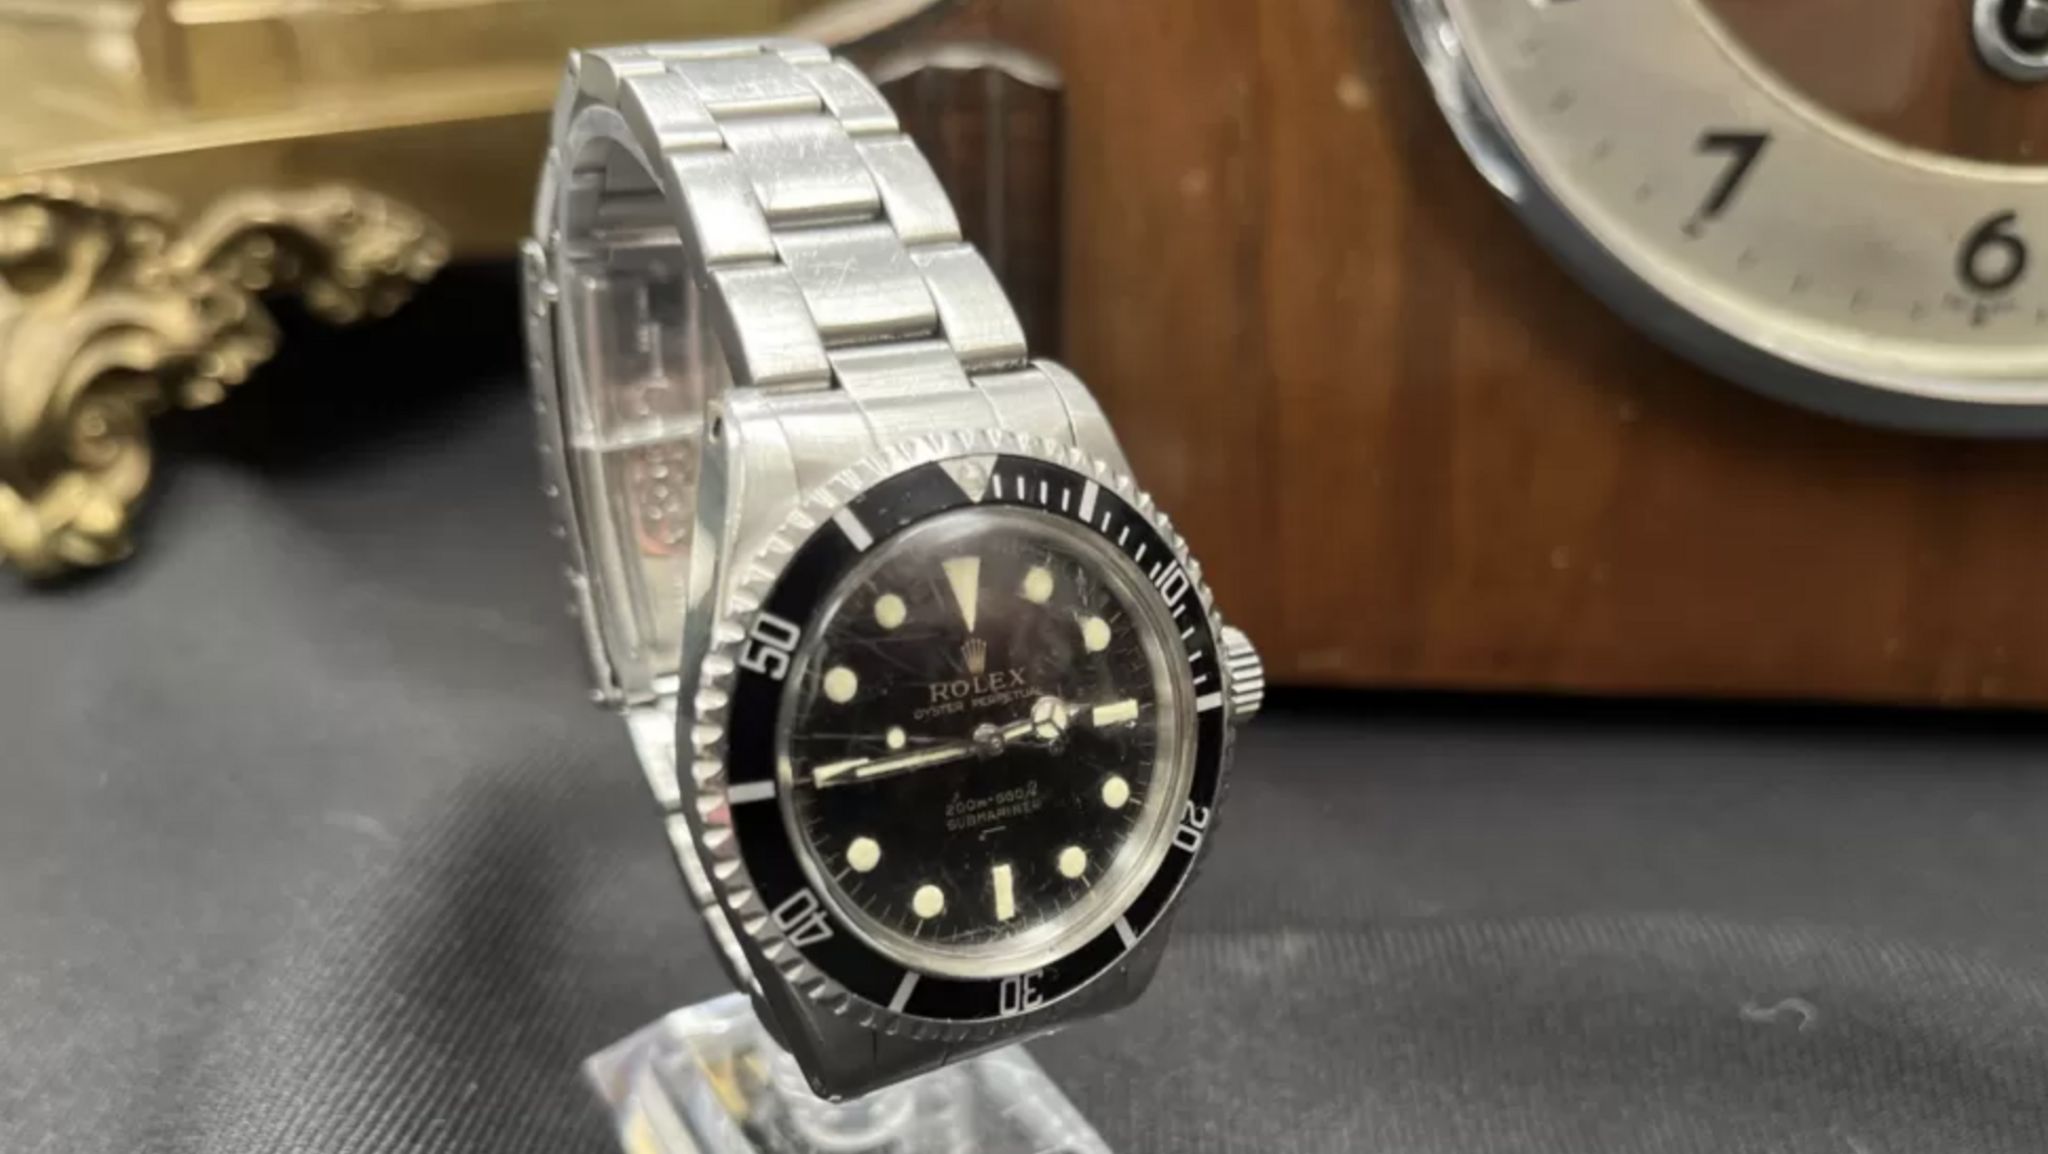 Diver's Rolex watch £70 sells for £40,000 - News